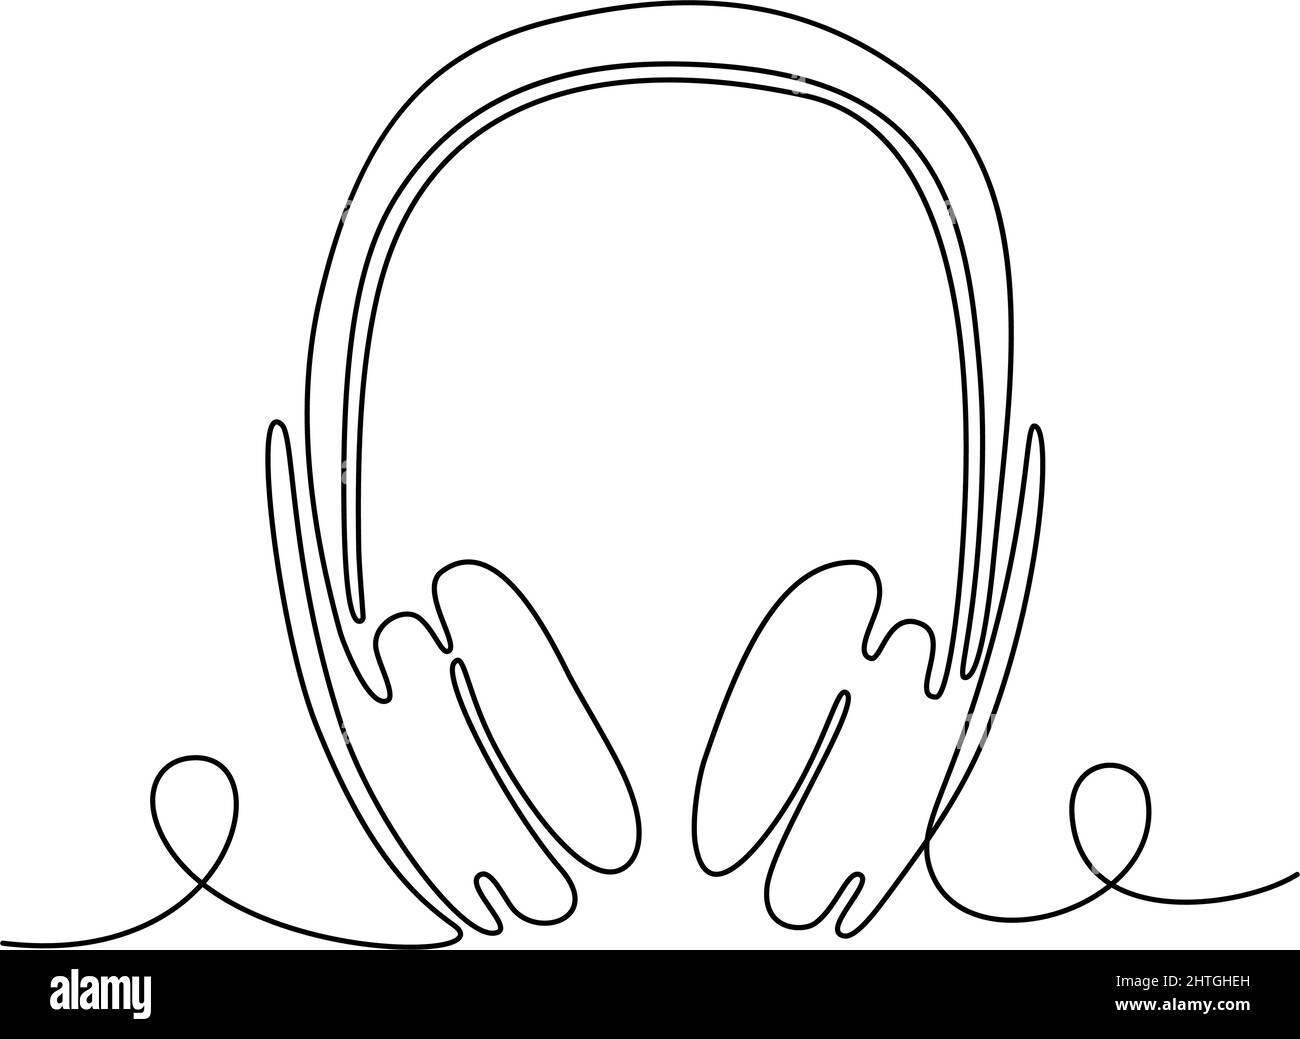 Headphone in one continuous line drawing, vector illustration Stock Vector